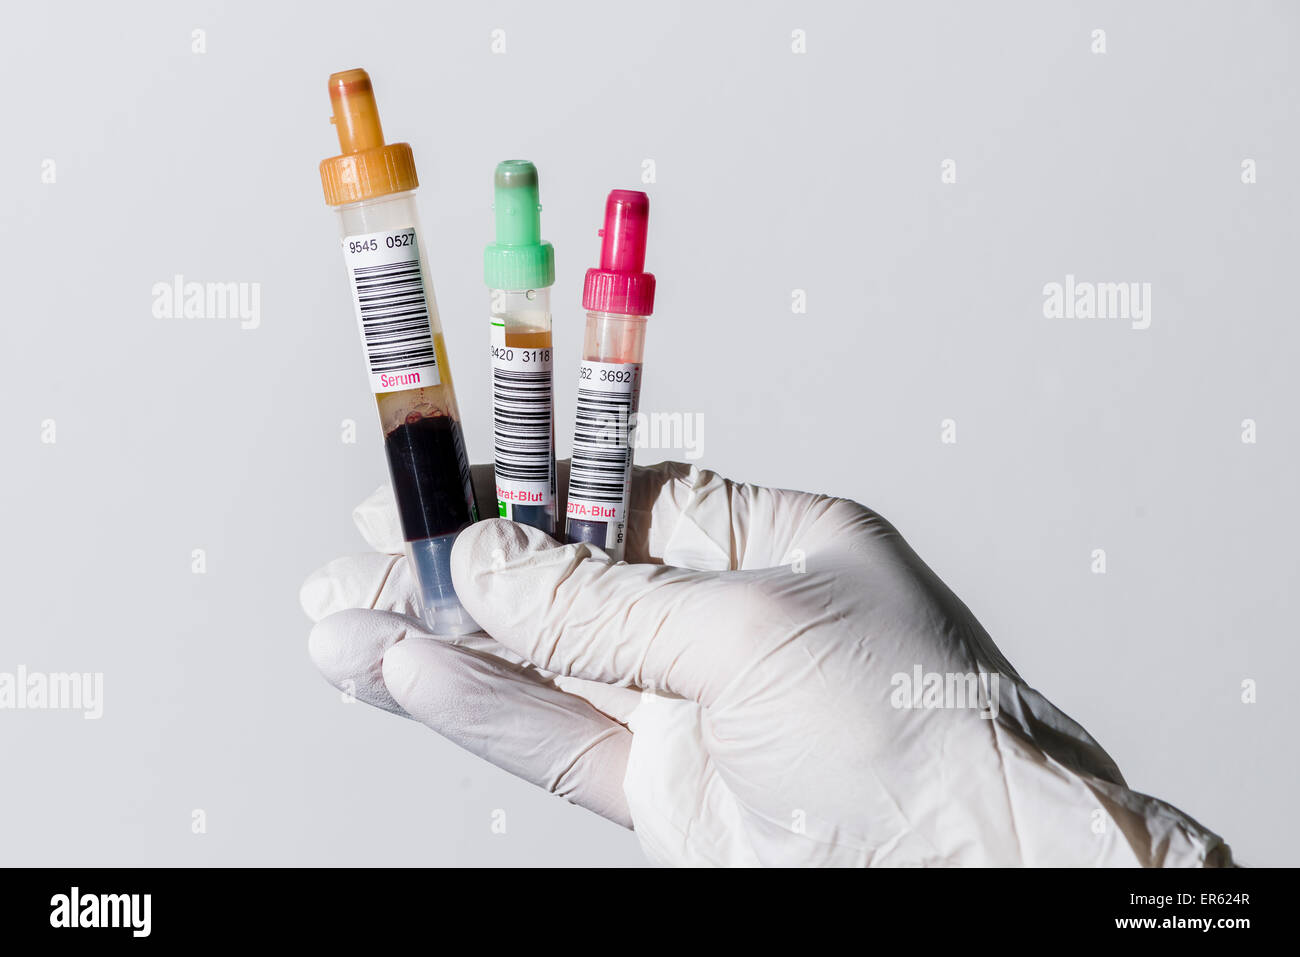 Laboratory assistant's hand holding three monovettes containing serum, citrate and EDTA, Chemnitz, Saxony, Germany Stock Photo